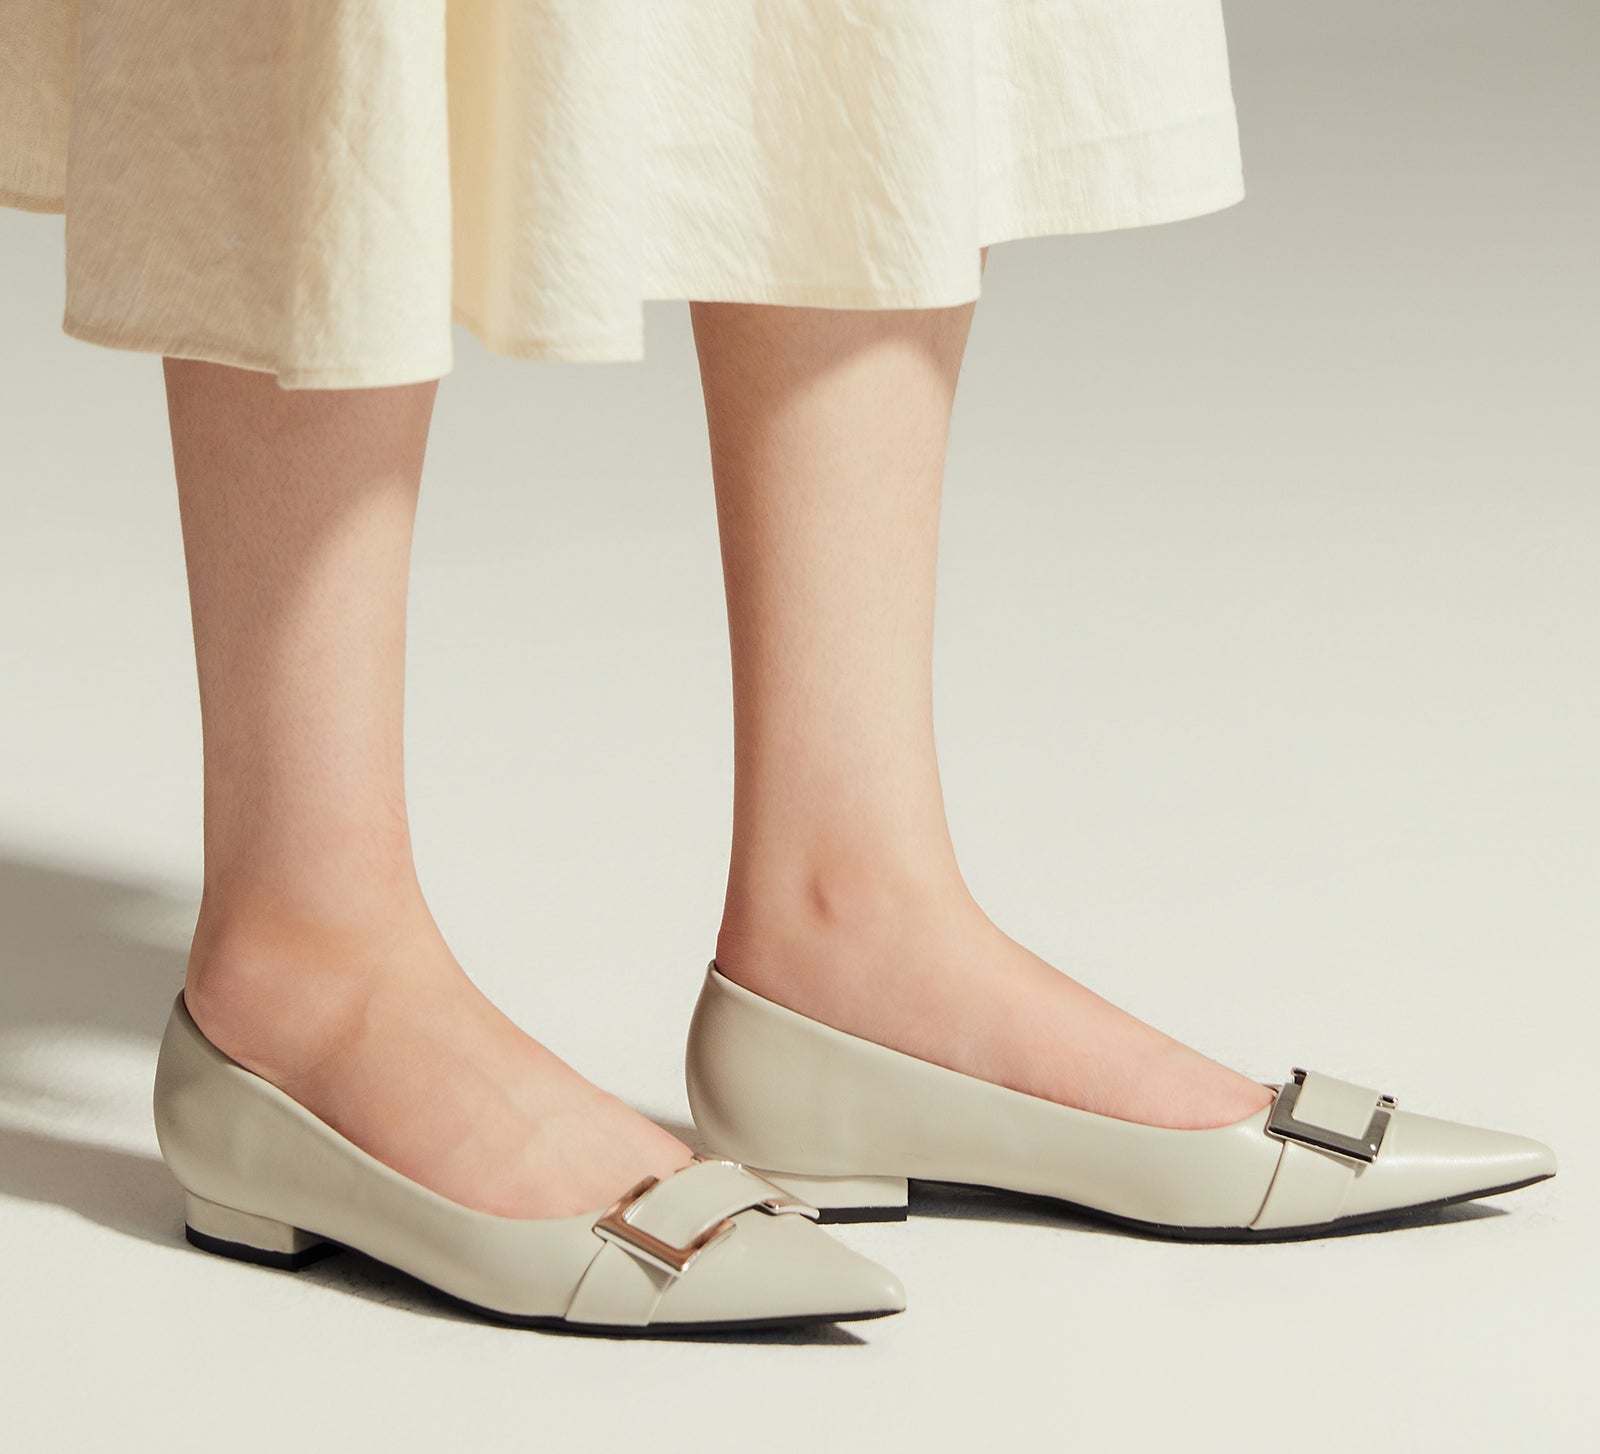 Grey Flats with a stylish Metal Buckle and Pointed Toe, perfect for a confident and fashionable look in any urban setting.